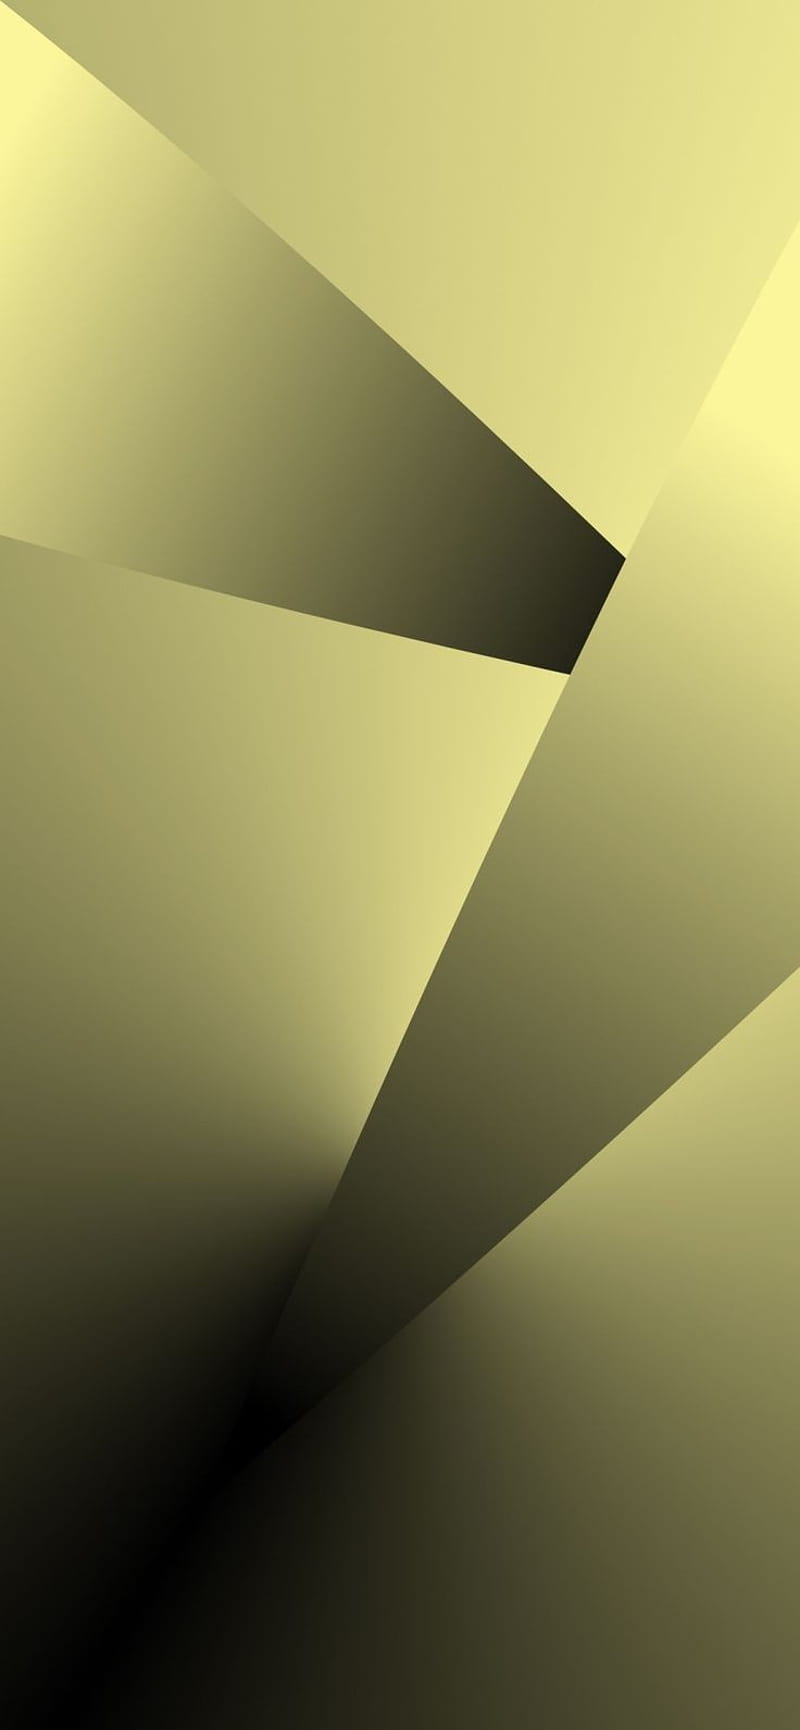 Premium Photo | Abstract background black and gold wallpaper with abstract  shapes